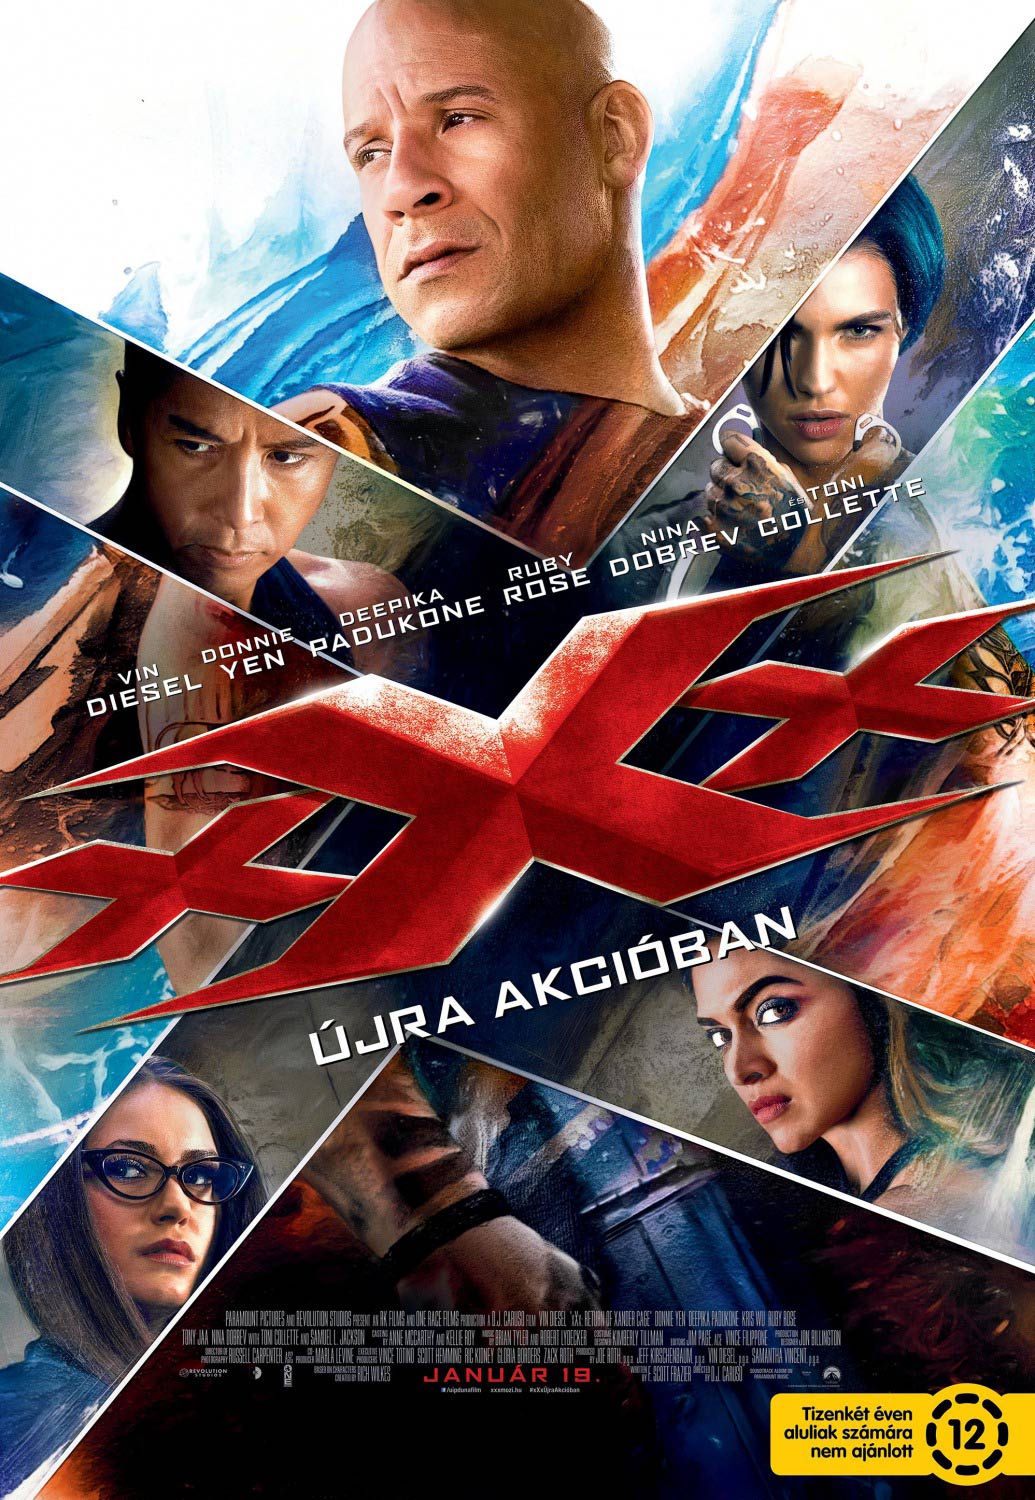 Xxx The Return Of Xander Cage 2017 Poster 1 Trailer Addict